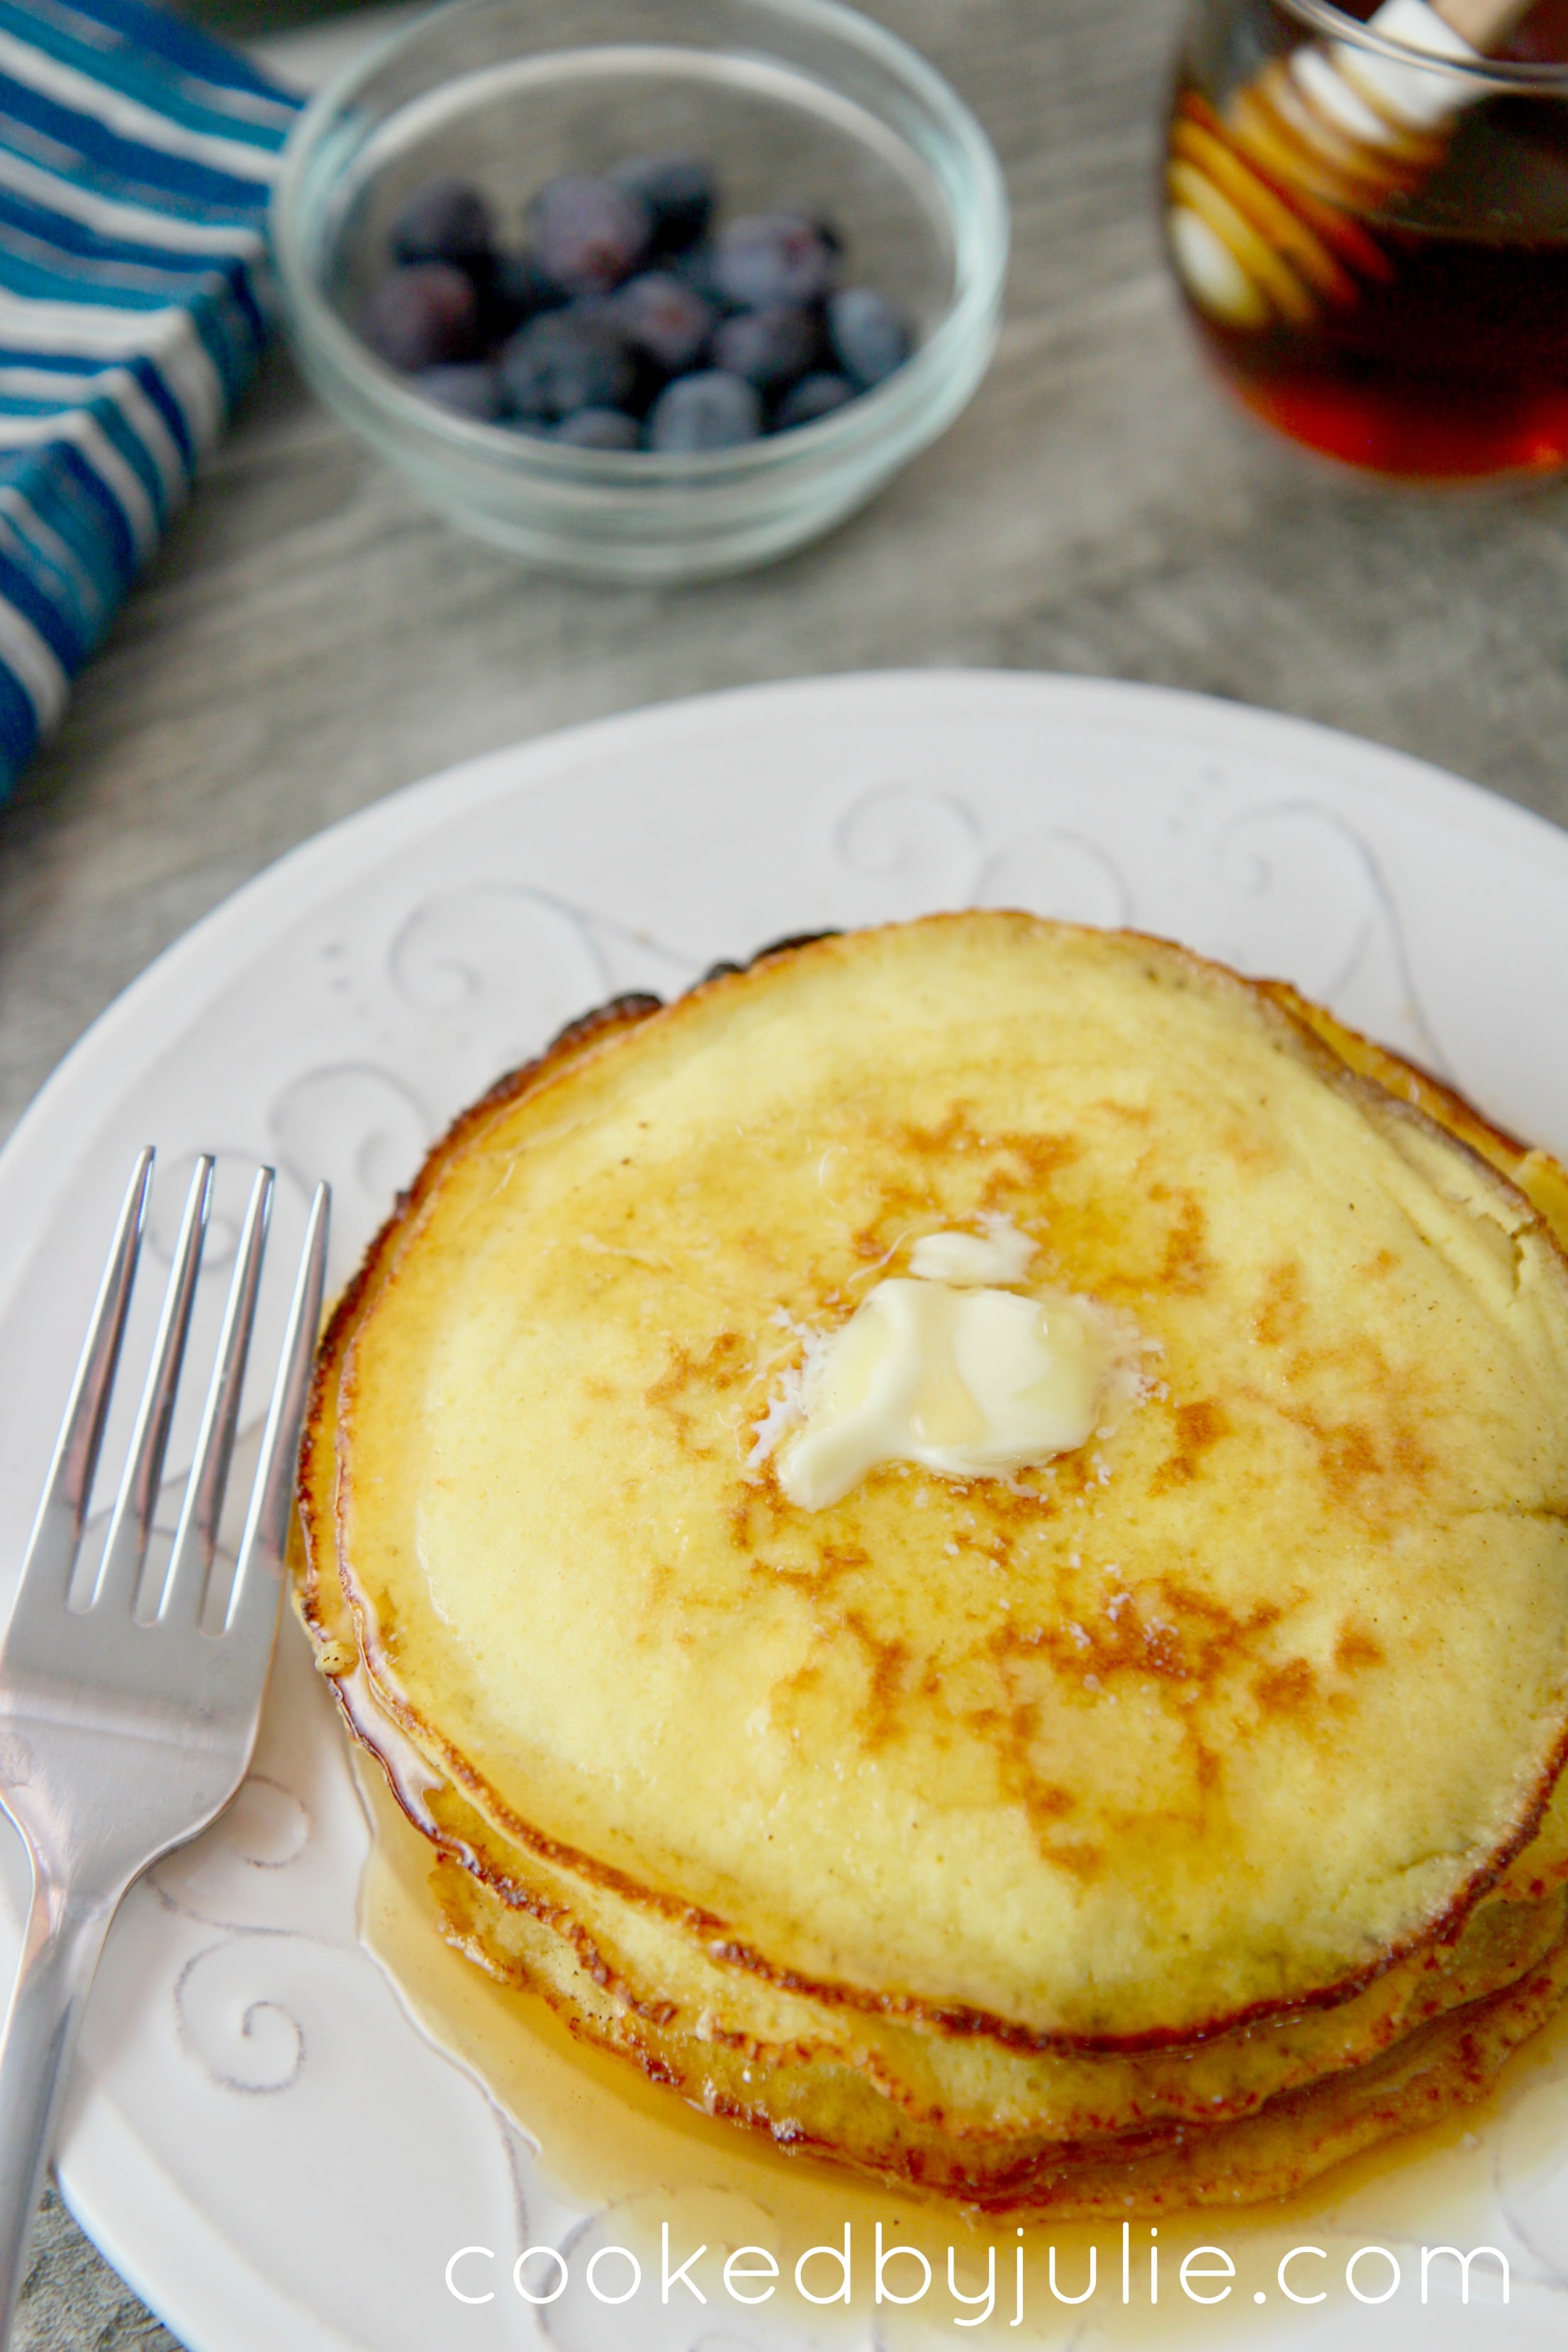 Keto-friendly low-carb pancakes with butter and syrup. Add blueberries for an extra garnish. 